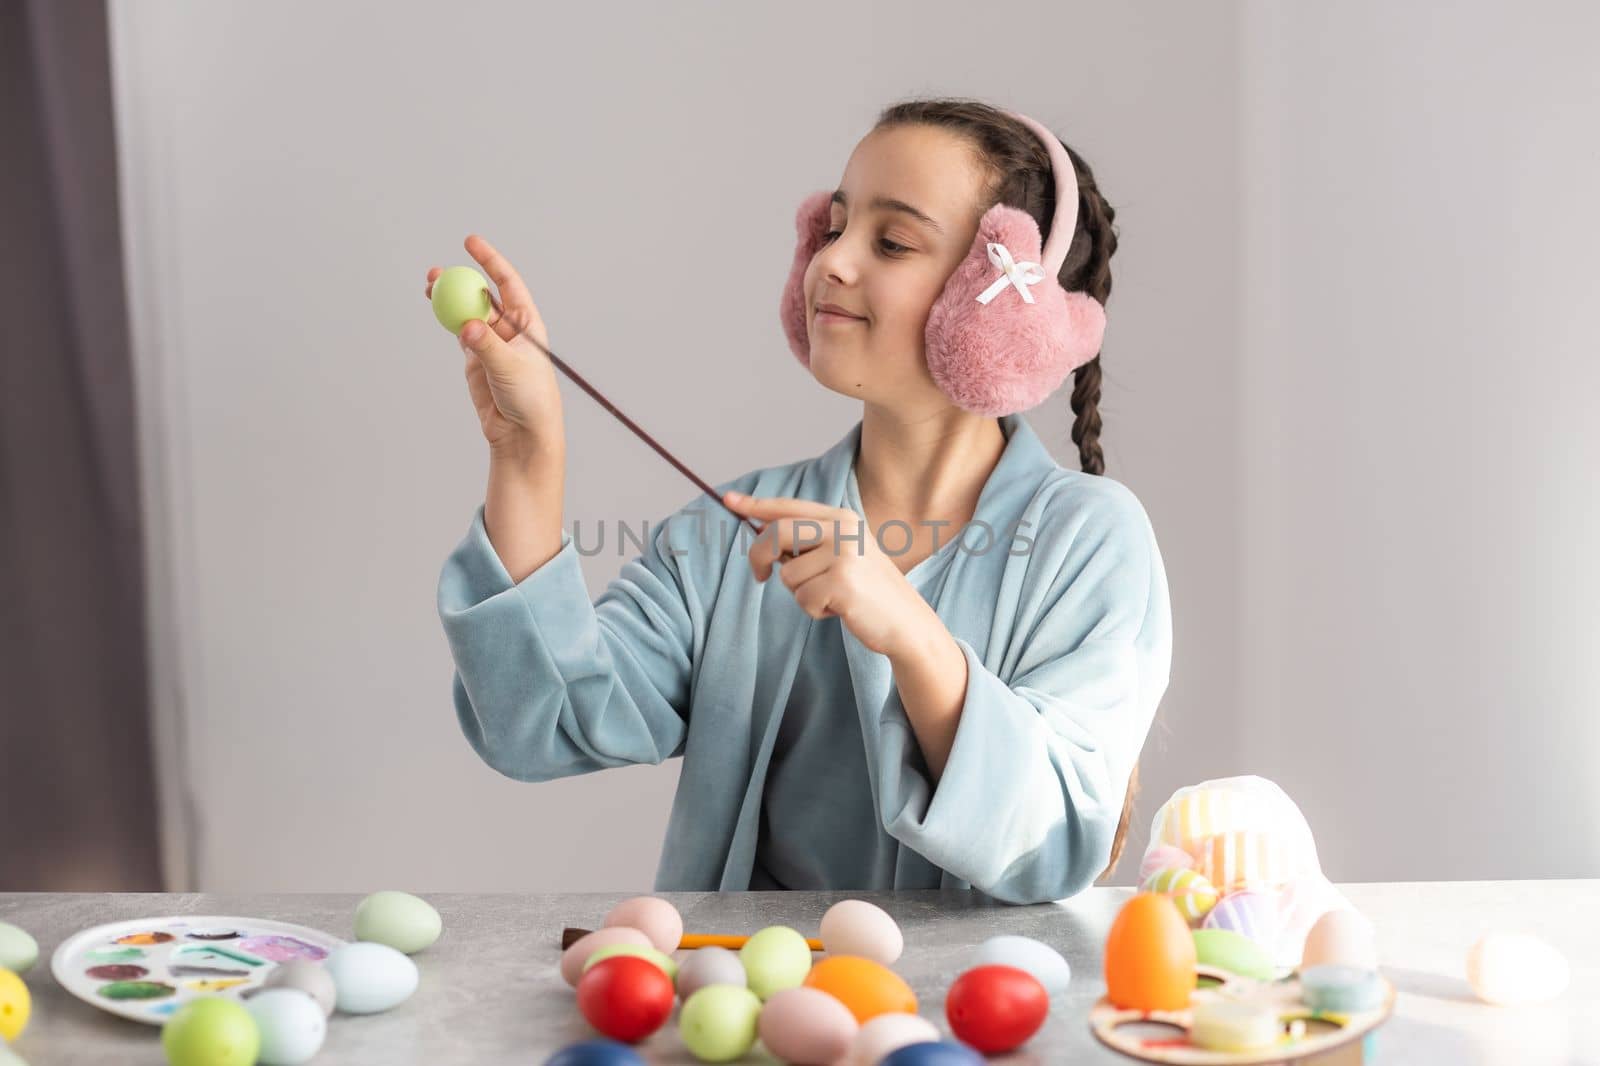 easter holiday celebration, cute girl, happy small child near colorful eggs, pencils.